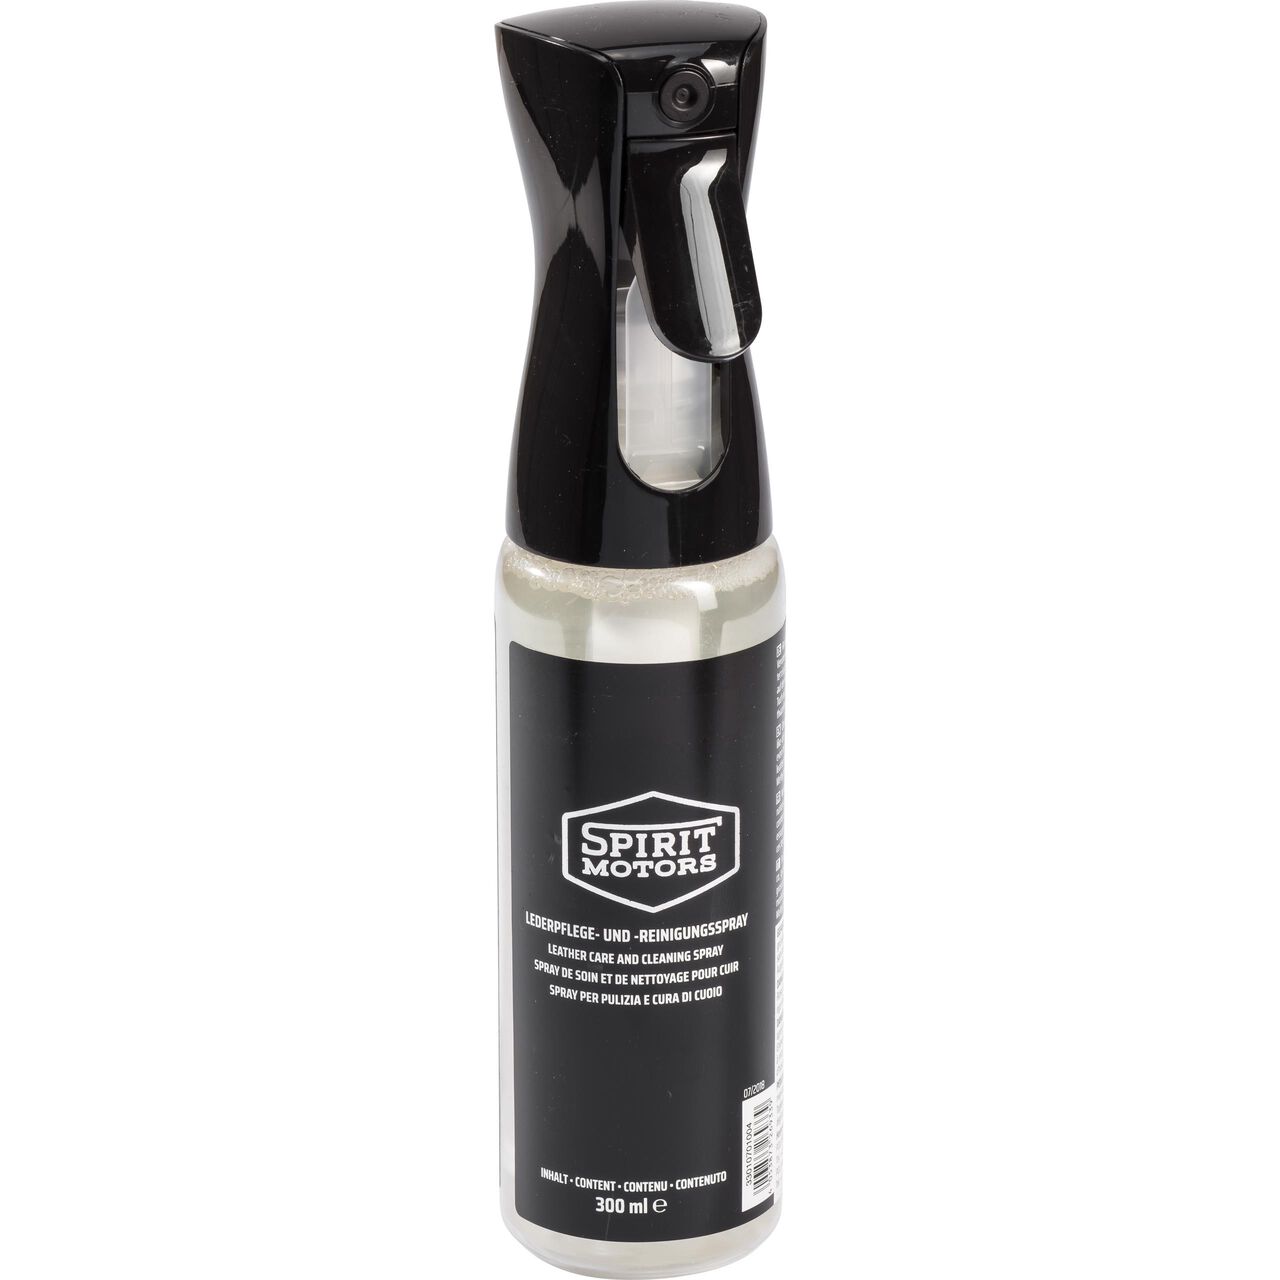 Leather care and cleaning spray 300 ml